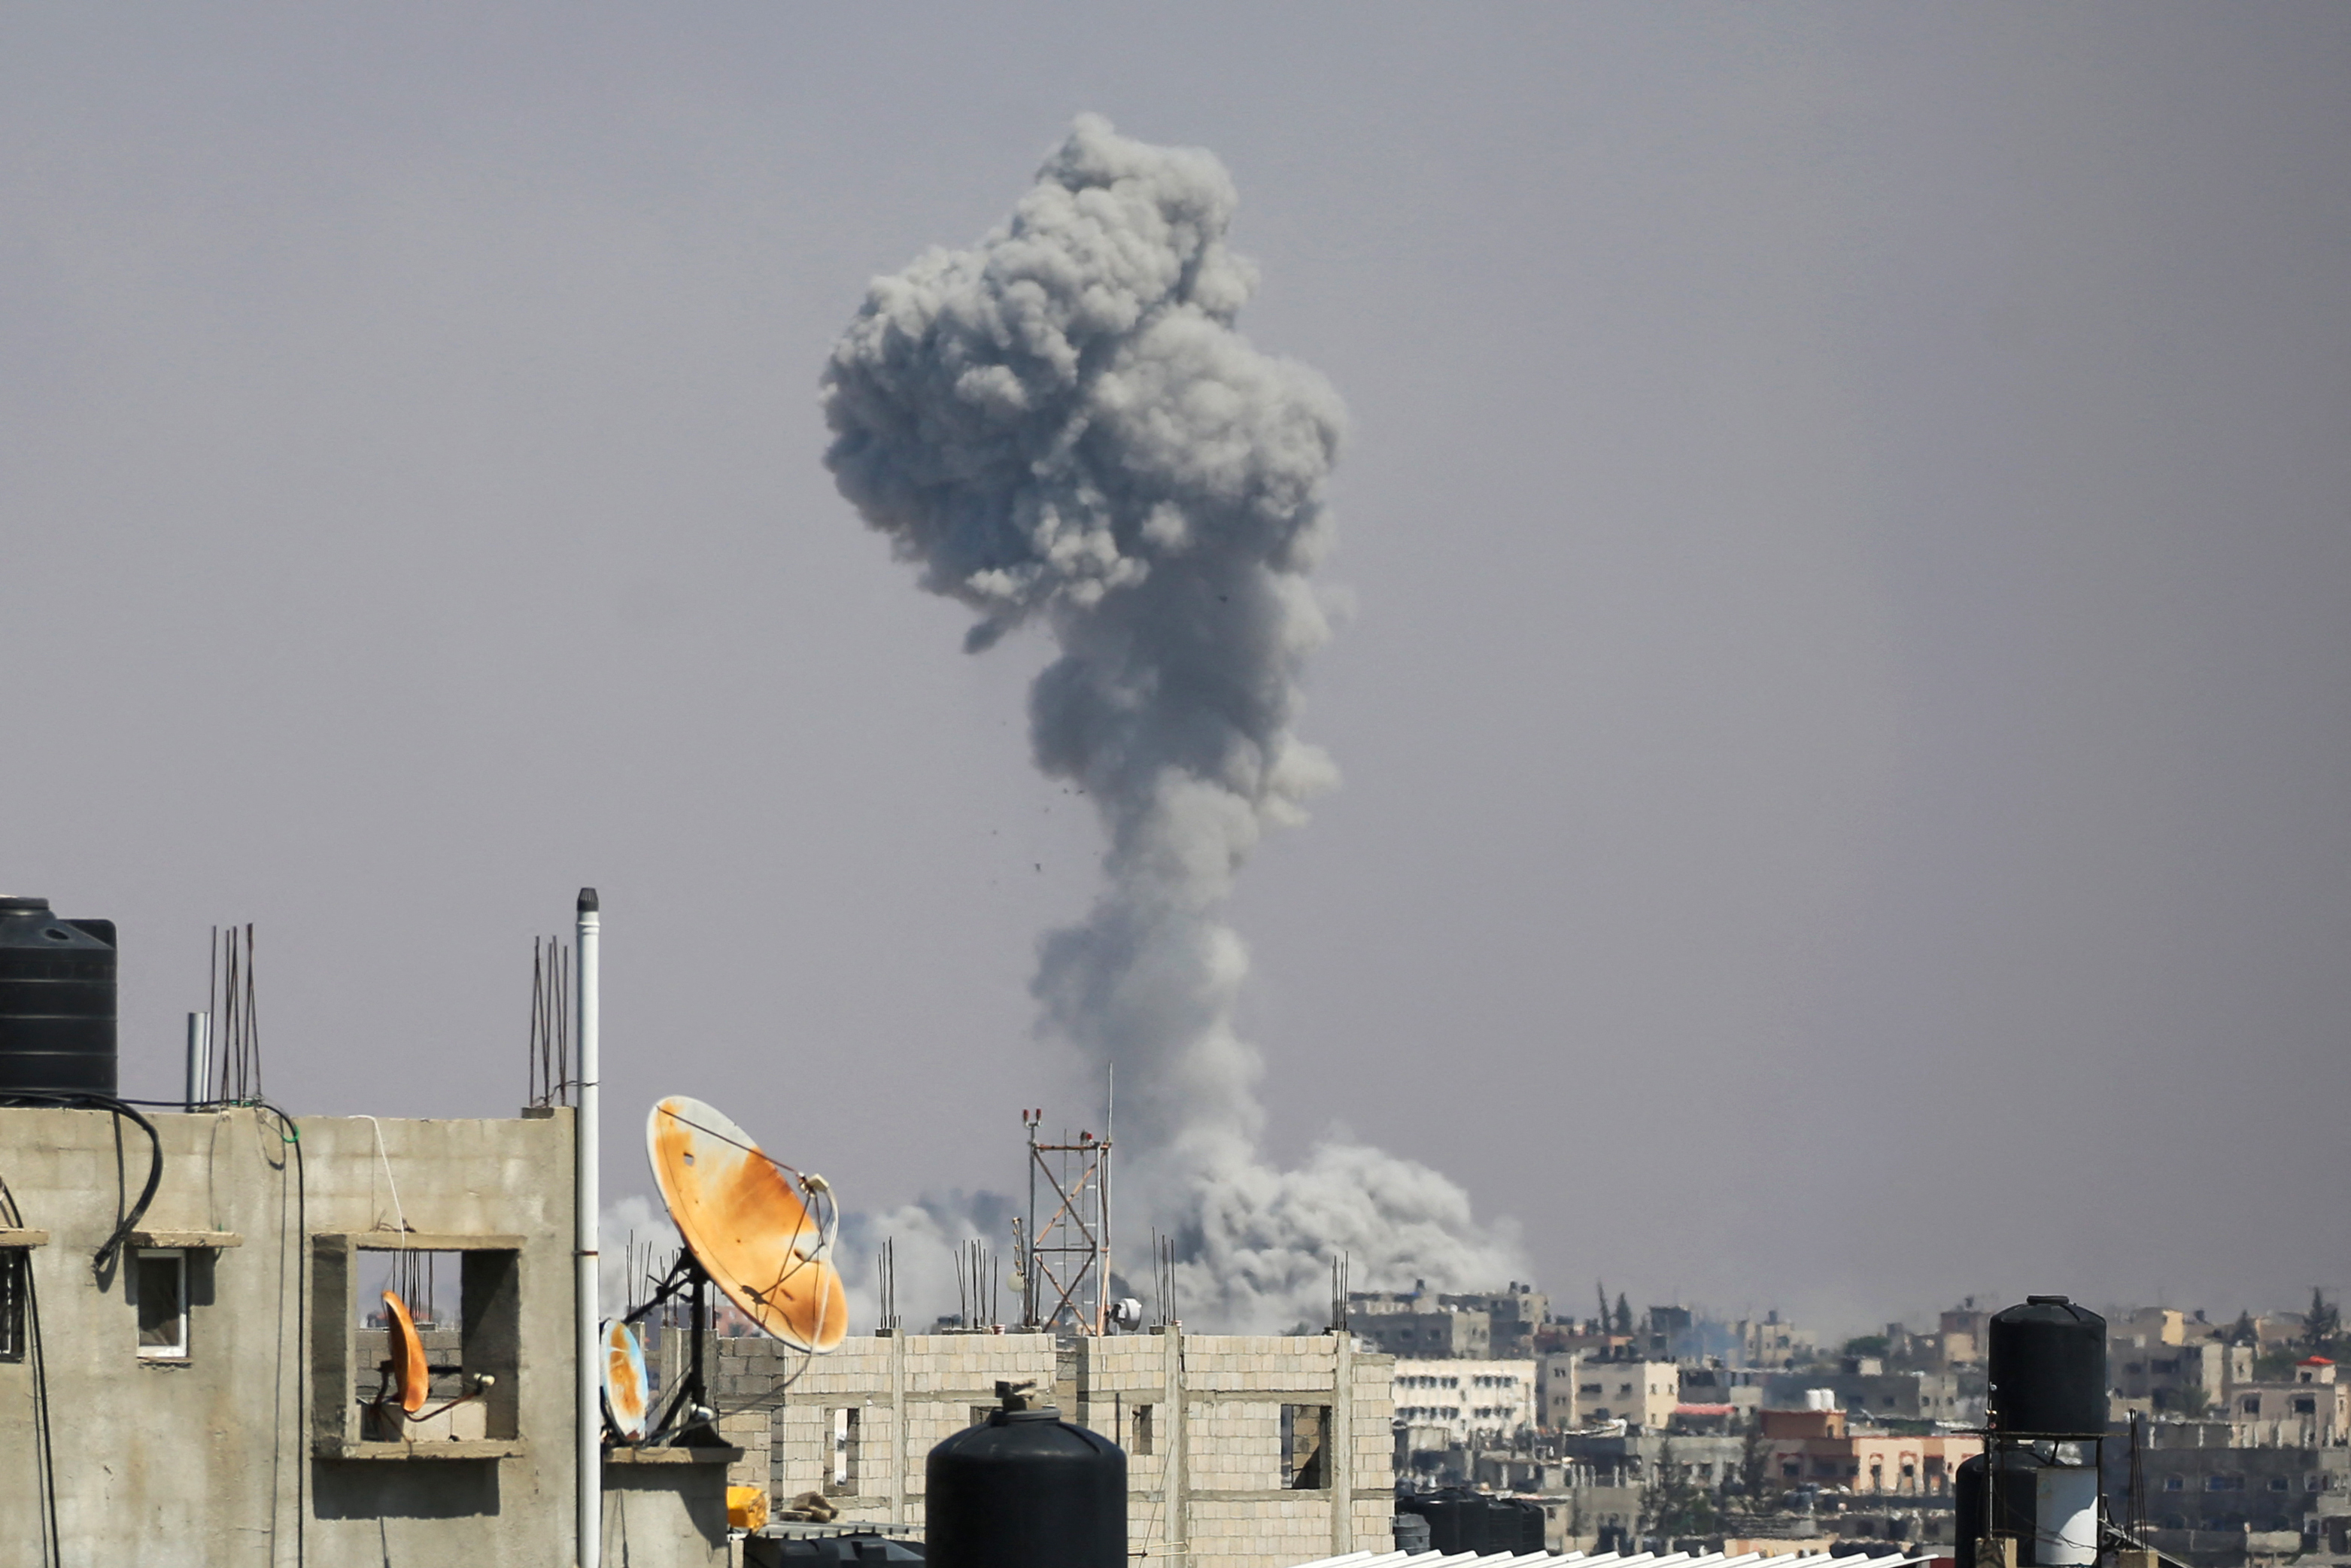 u.s. paused shipment of thousands of bombs to israel amid rafah rift